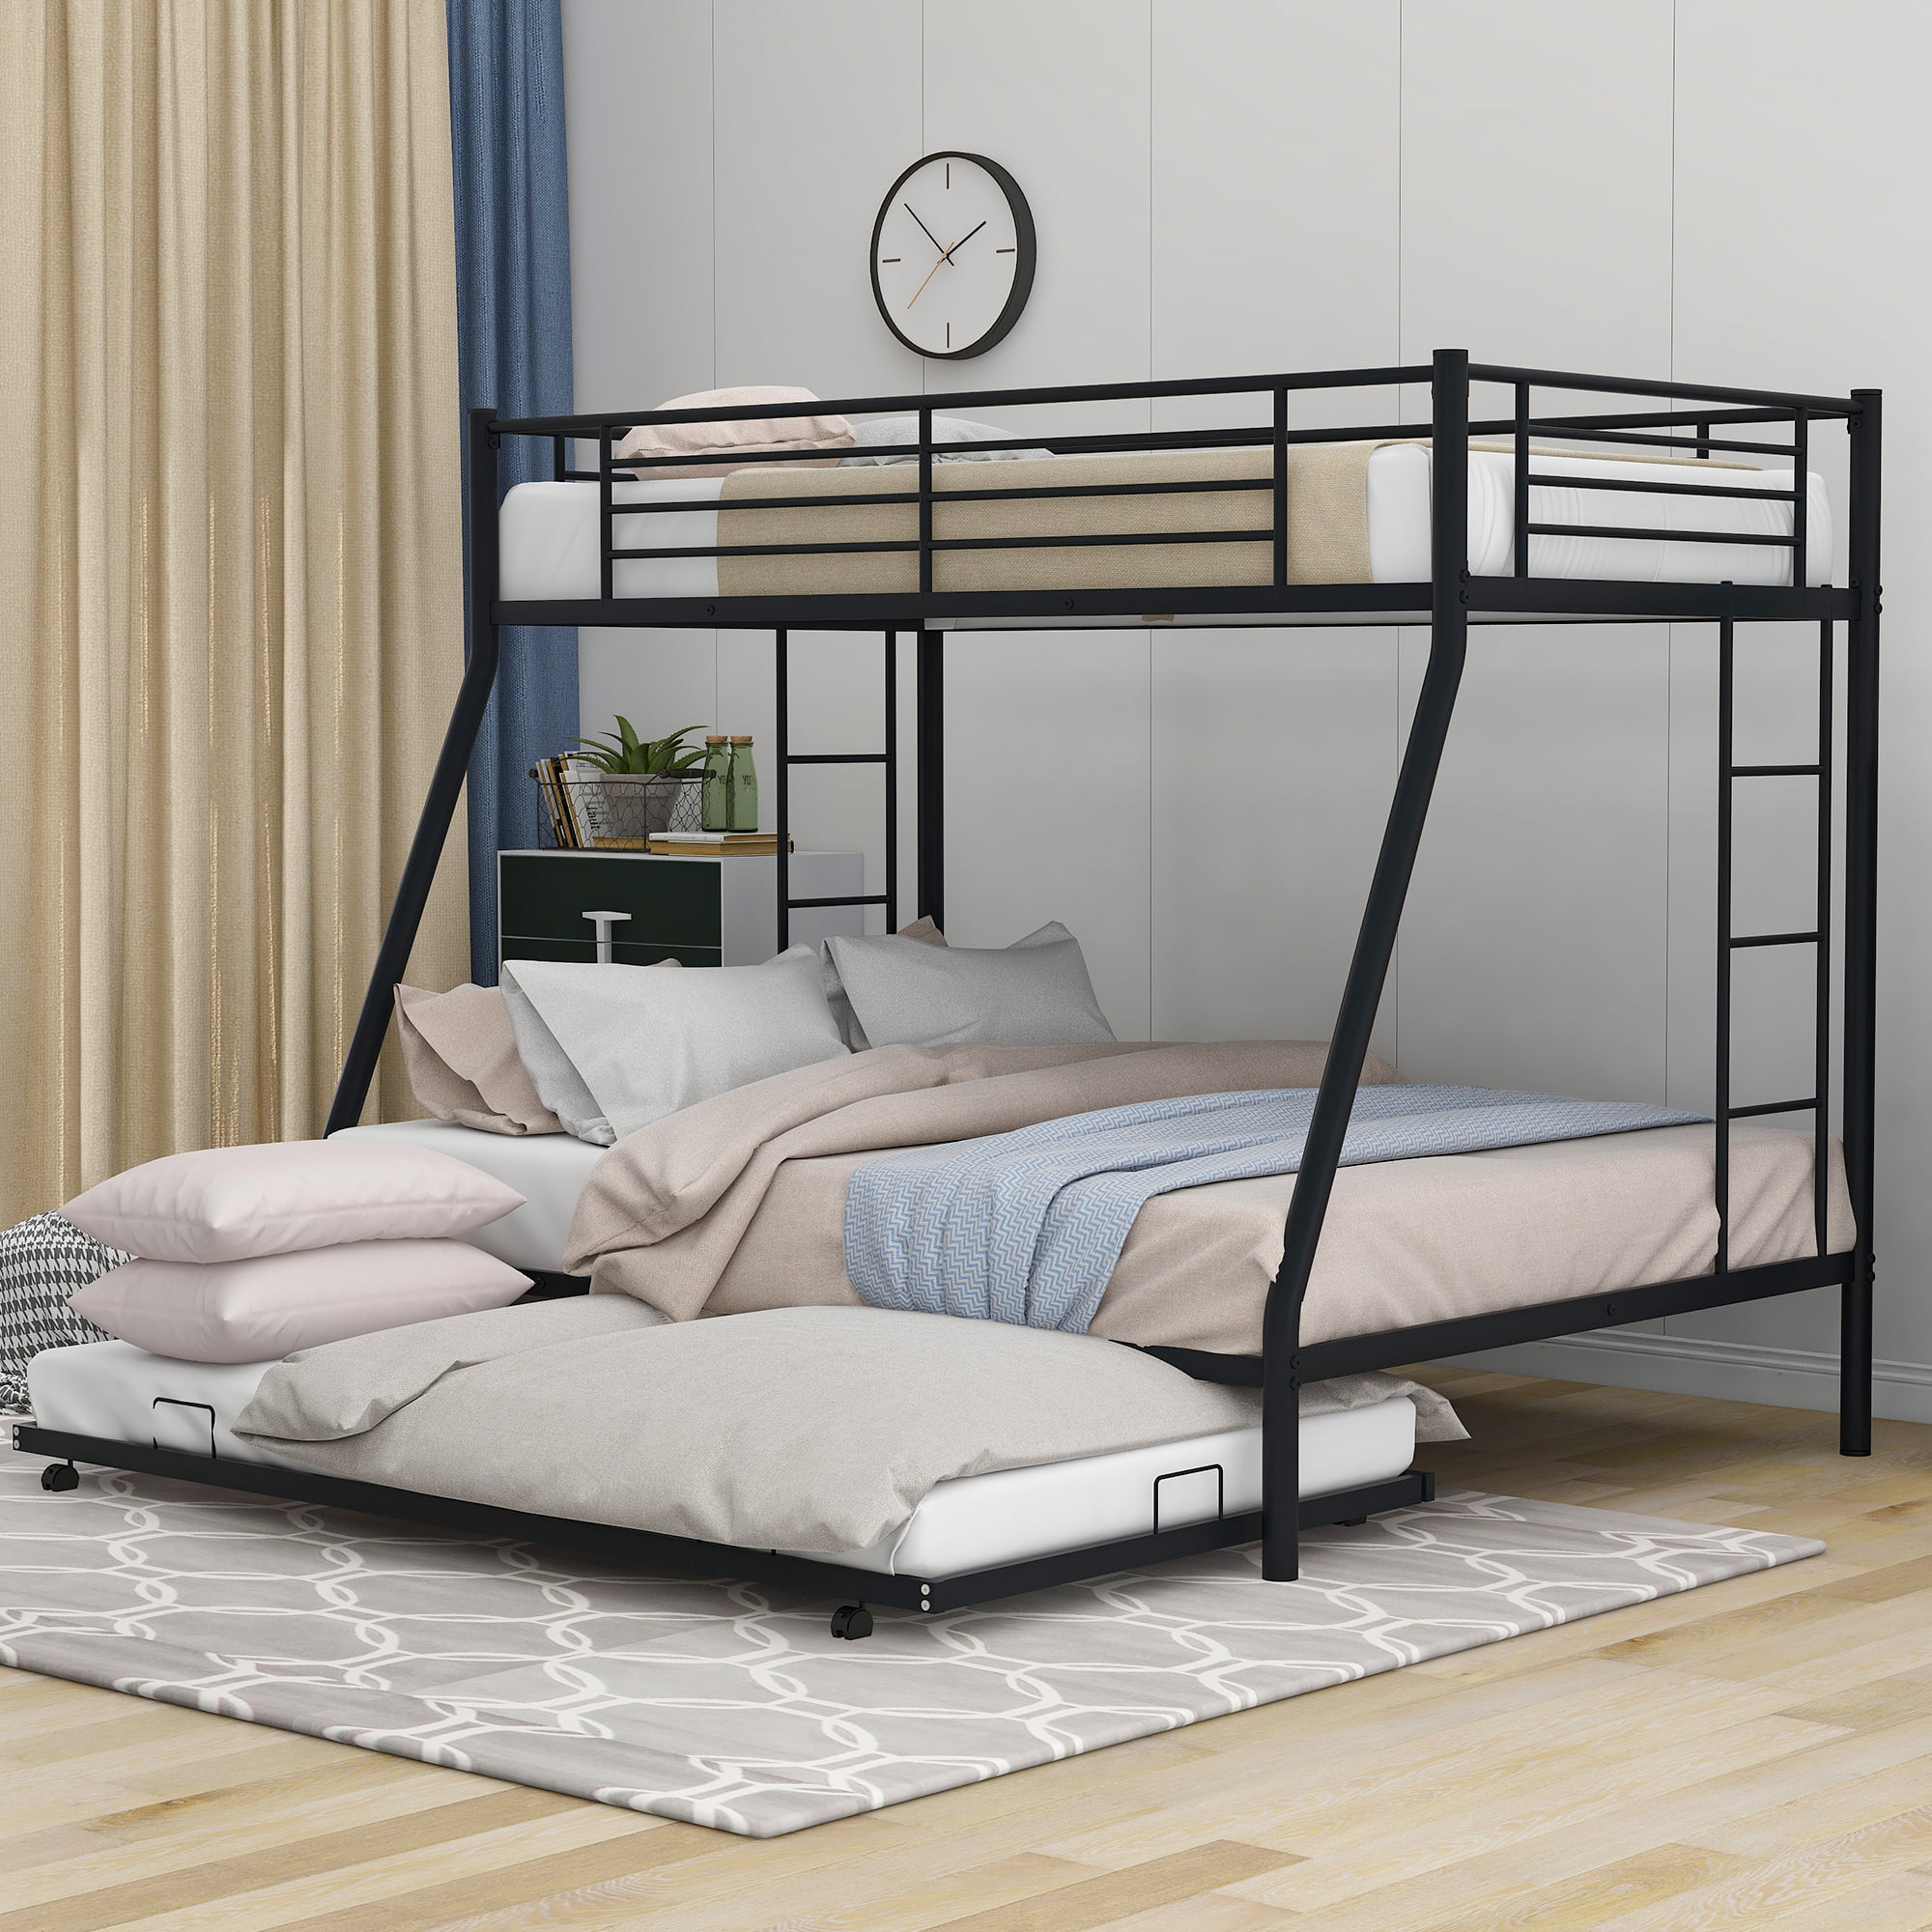 Euroco Steel Twin Over Full Bunk Bed, Dhp Twin Over Full Bunk Bed Instructions